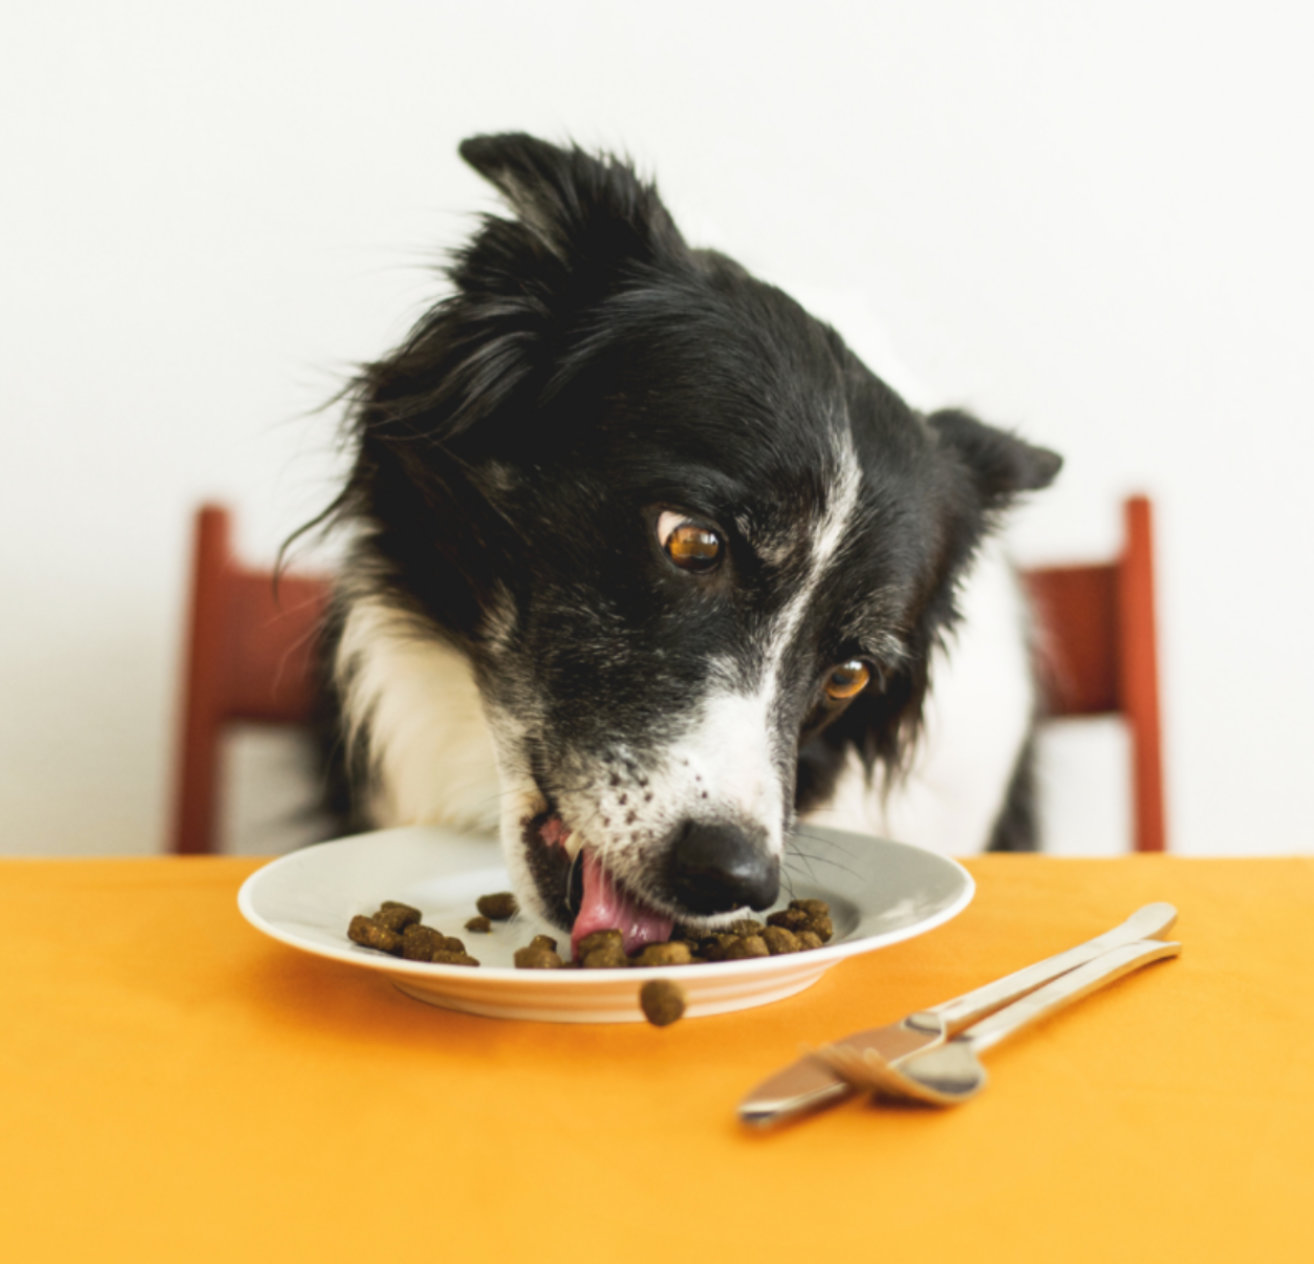 Photo of a dog sitting at a table eating kibble from a plate.